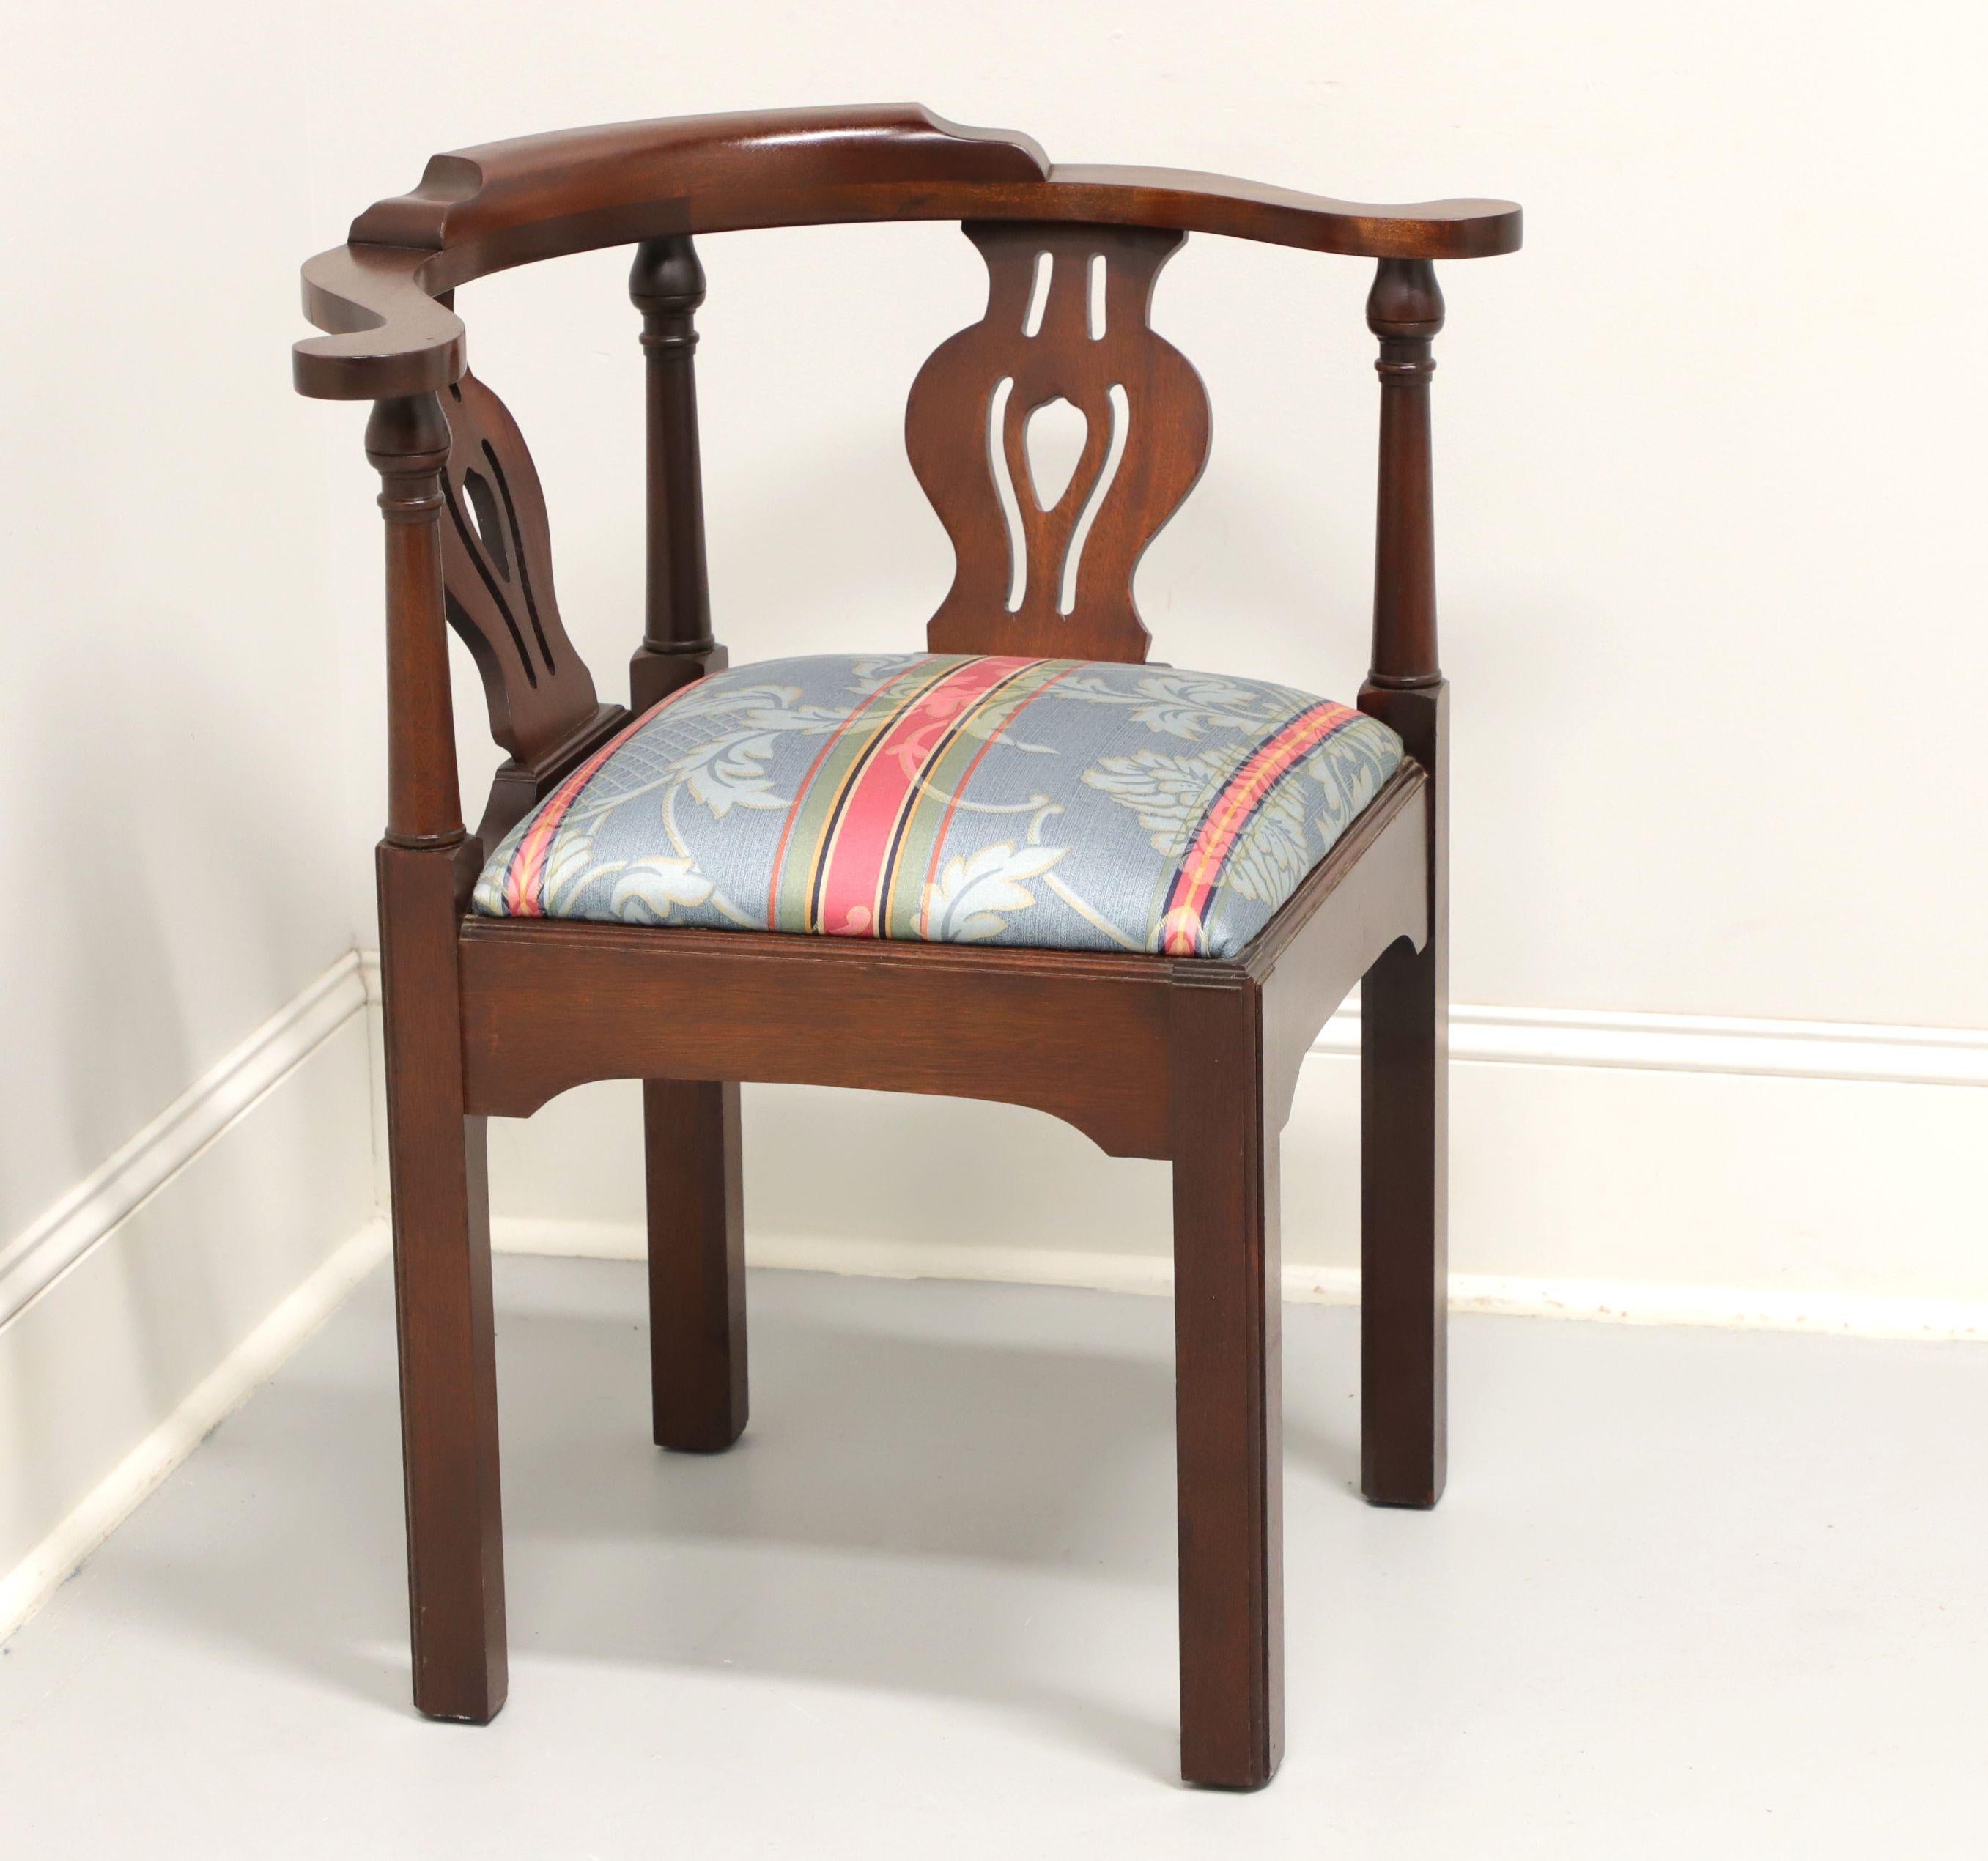 A Chippendale style corner chair by high-quality furniture maker Craftique. Solid mahogany with their Old Wood finish, curved crestrail, carved backrest, blue/silver/pink/green color stripe fabric upholstered seat, carved apron and straight legs.